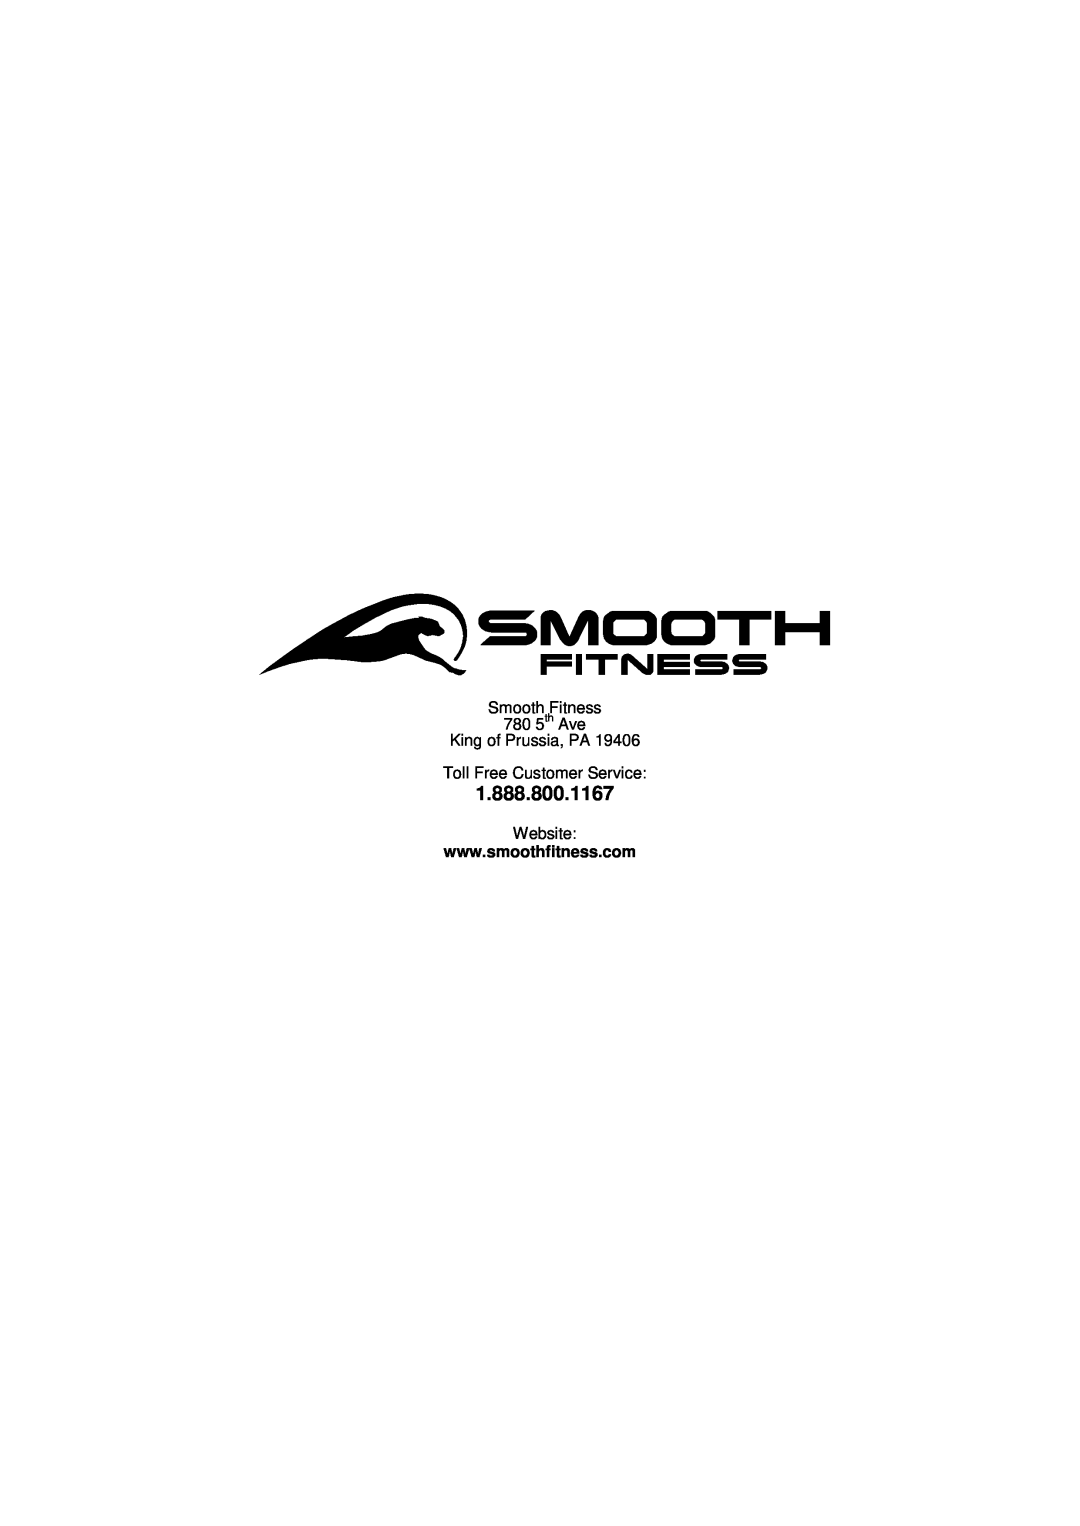 Smooth Fitness CE-3.0 1.888.800.1167, Smooth Fitness 780 5th Ave King of Prussia, PA, Toll Free Customer Service, Website 